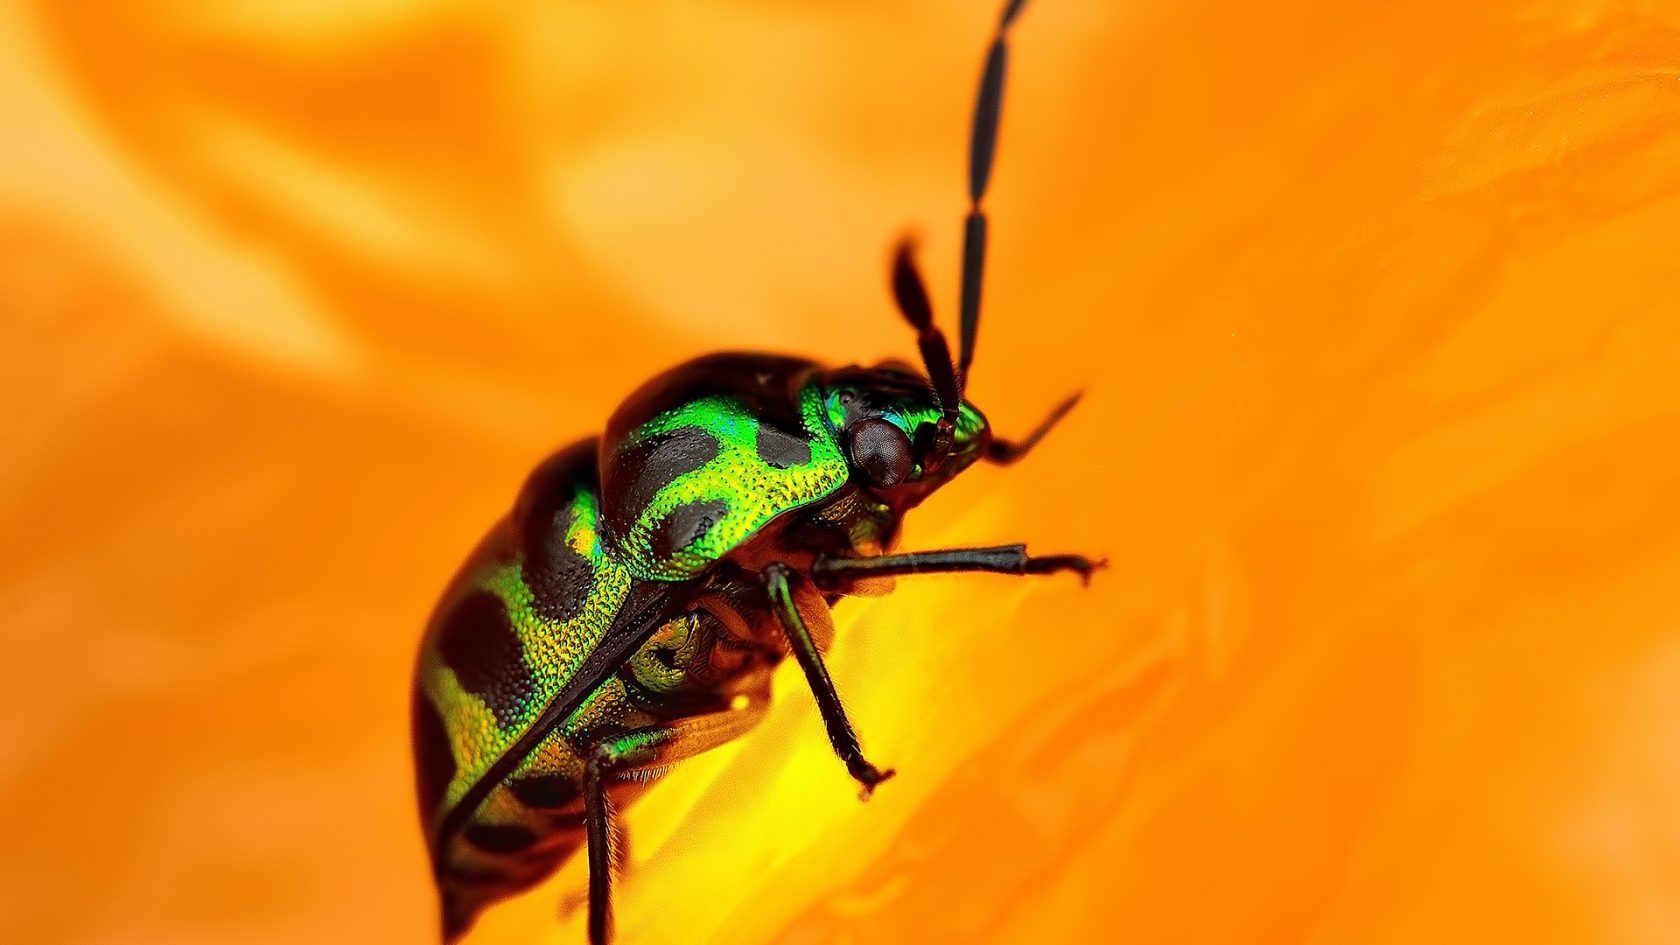 Green Beetle for 1680 x 945 HDTV resolution